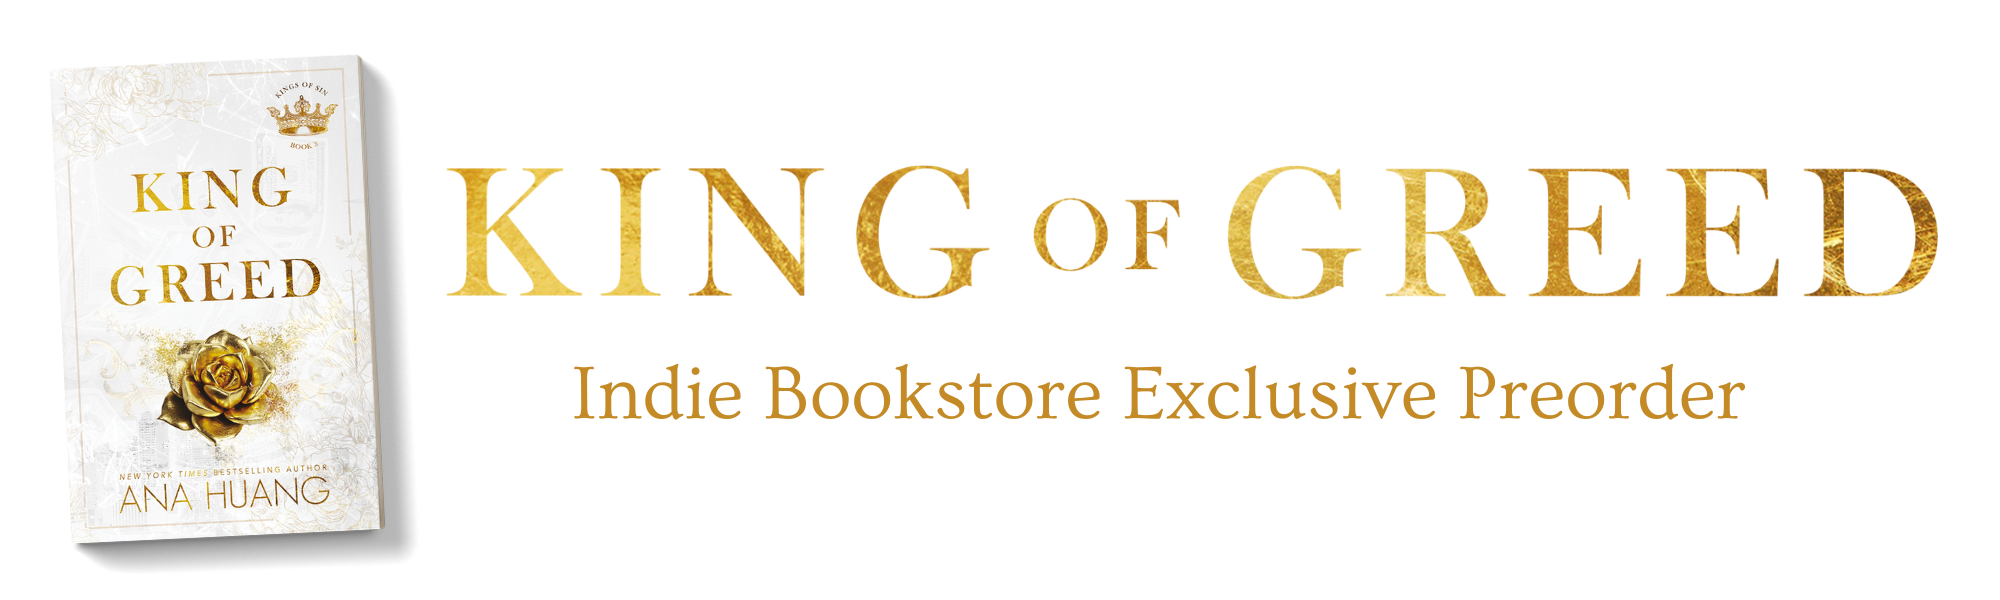 Download King of Greed by Ana Haung novel free